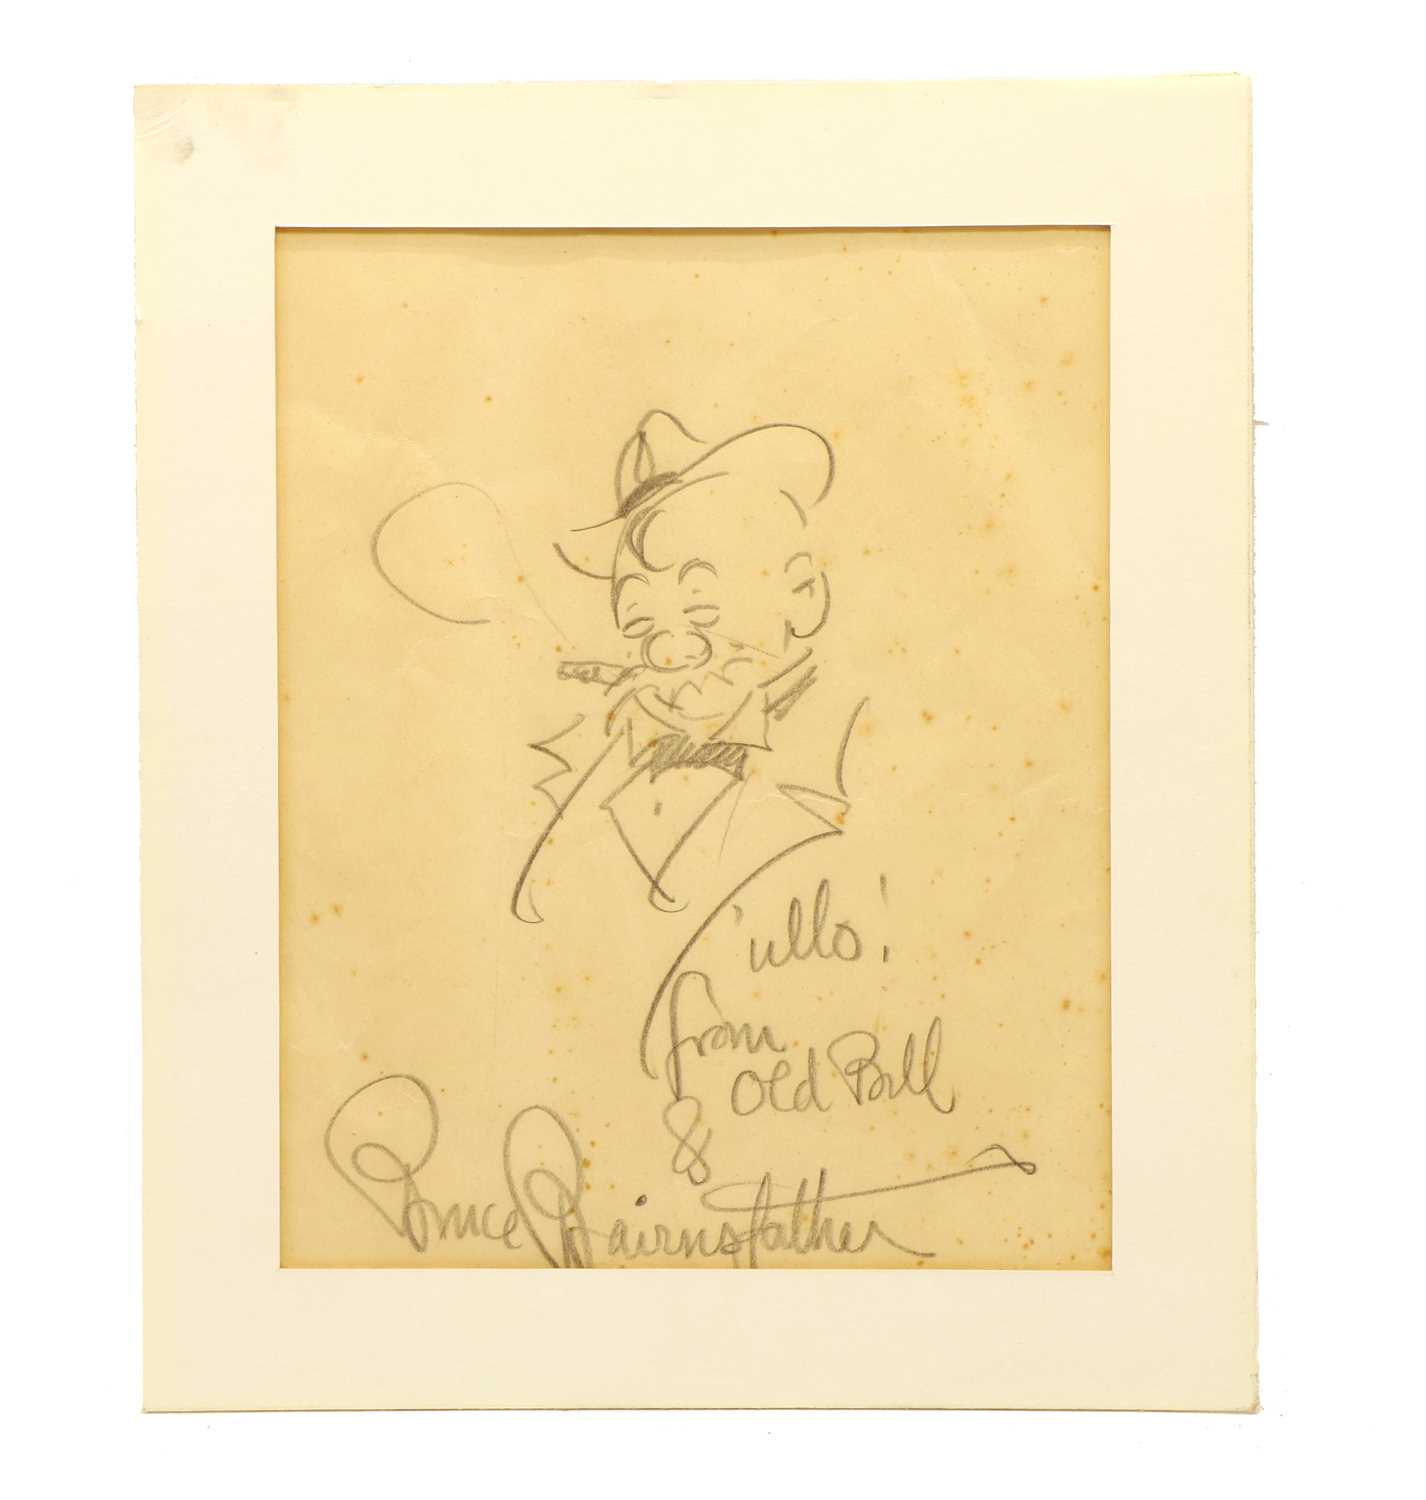 Lot 57 - Bruce Bairnsfather, 'Ullo from Old Bill' , pencil sketch, signed